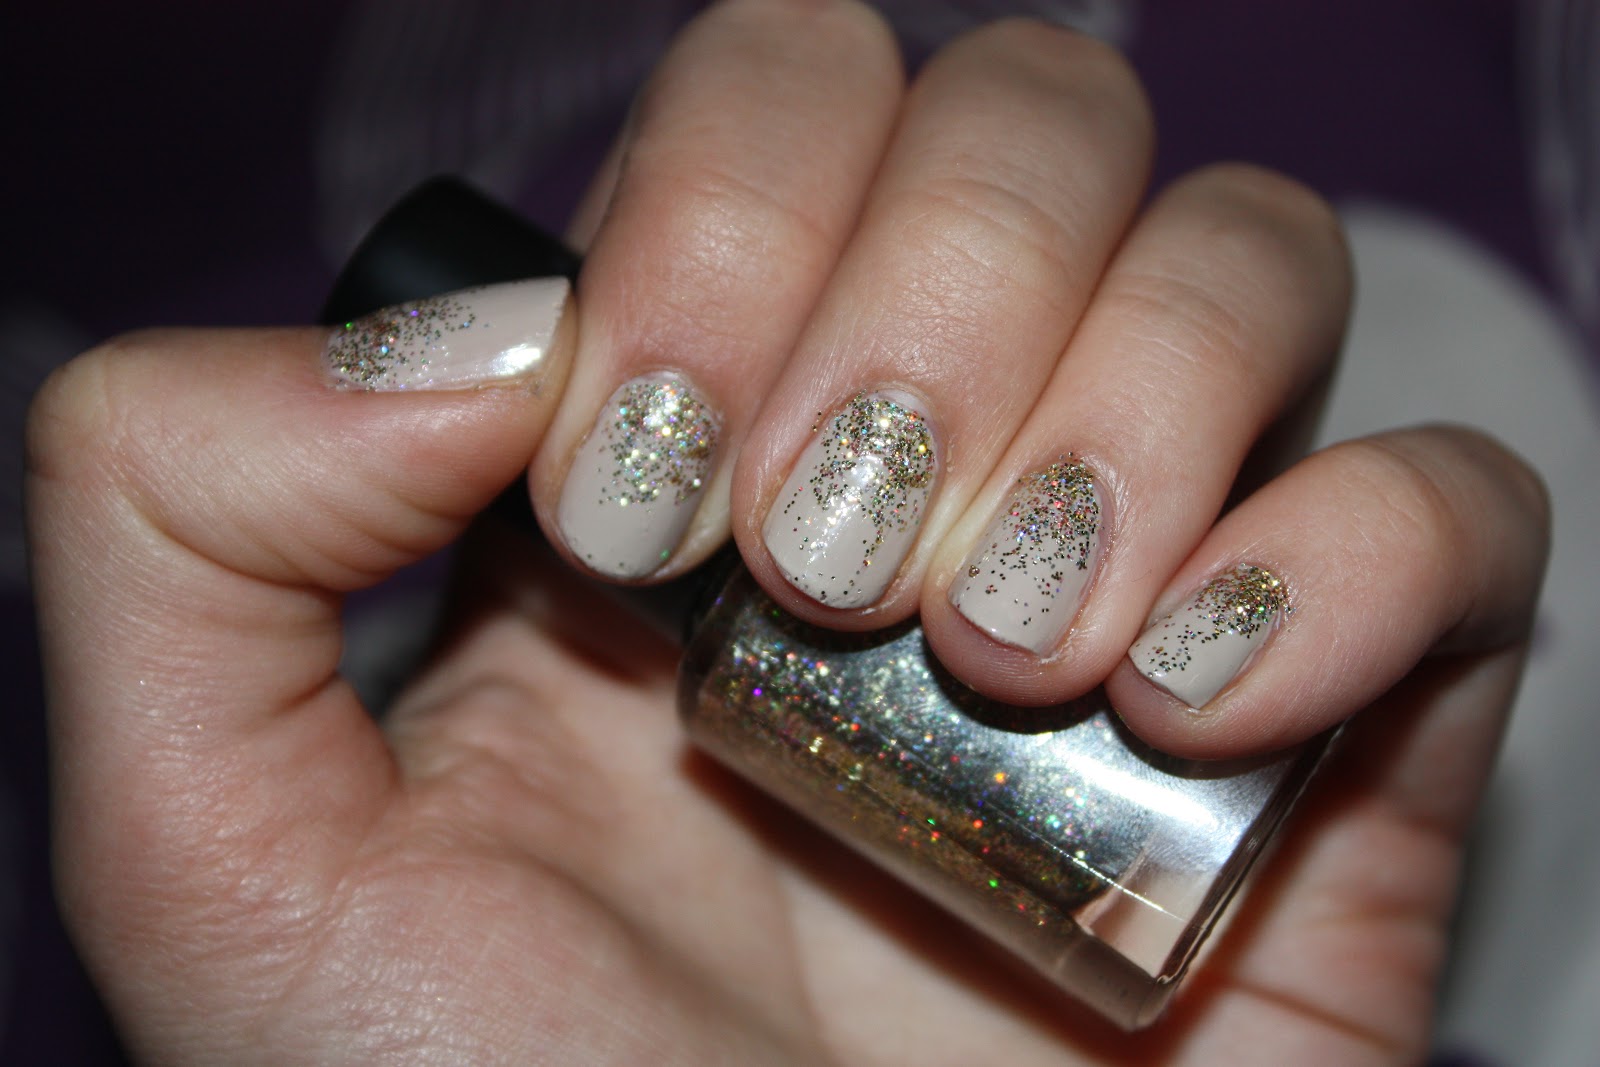 6. Ombre Glitter Nails with Gel Polish - wide 3